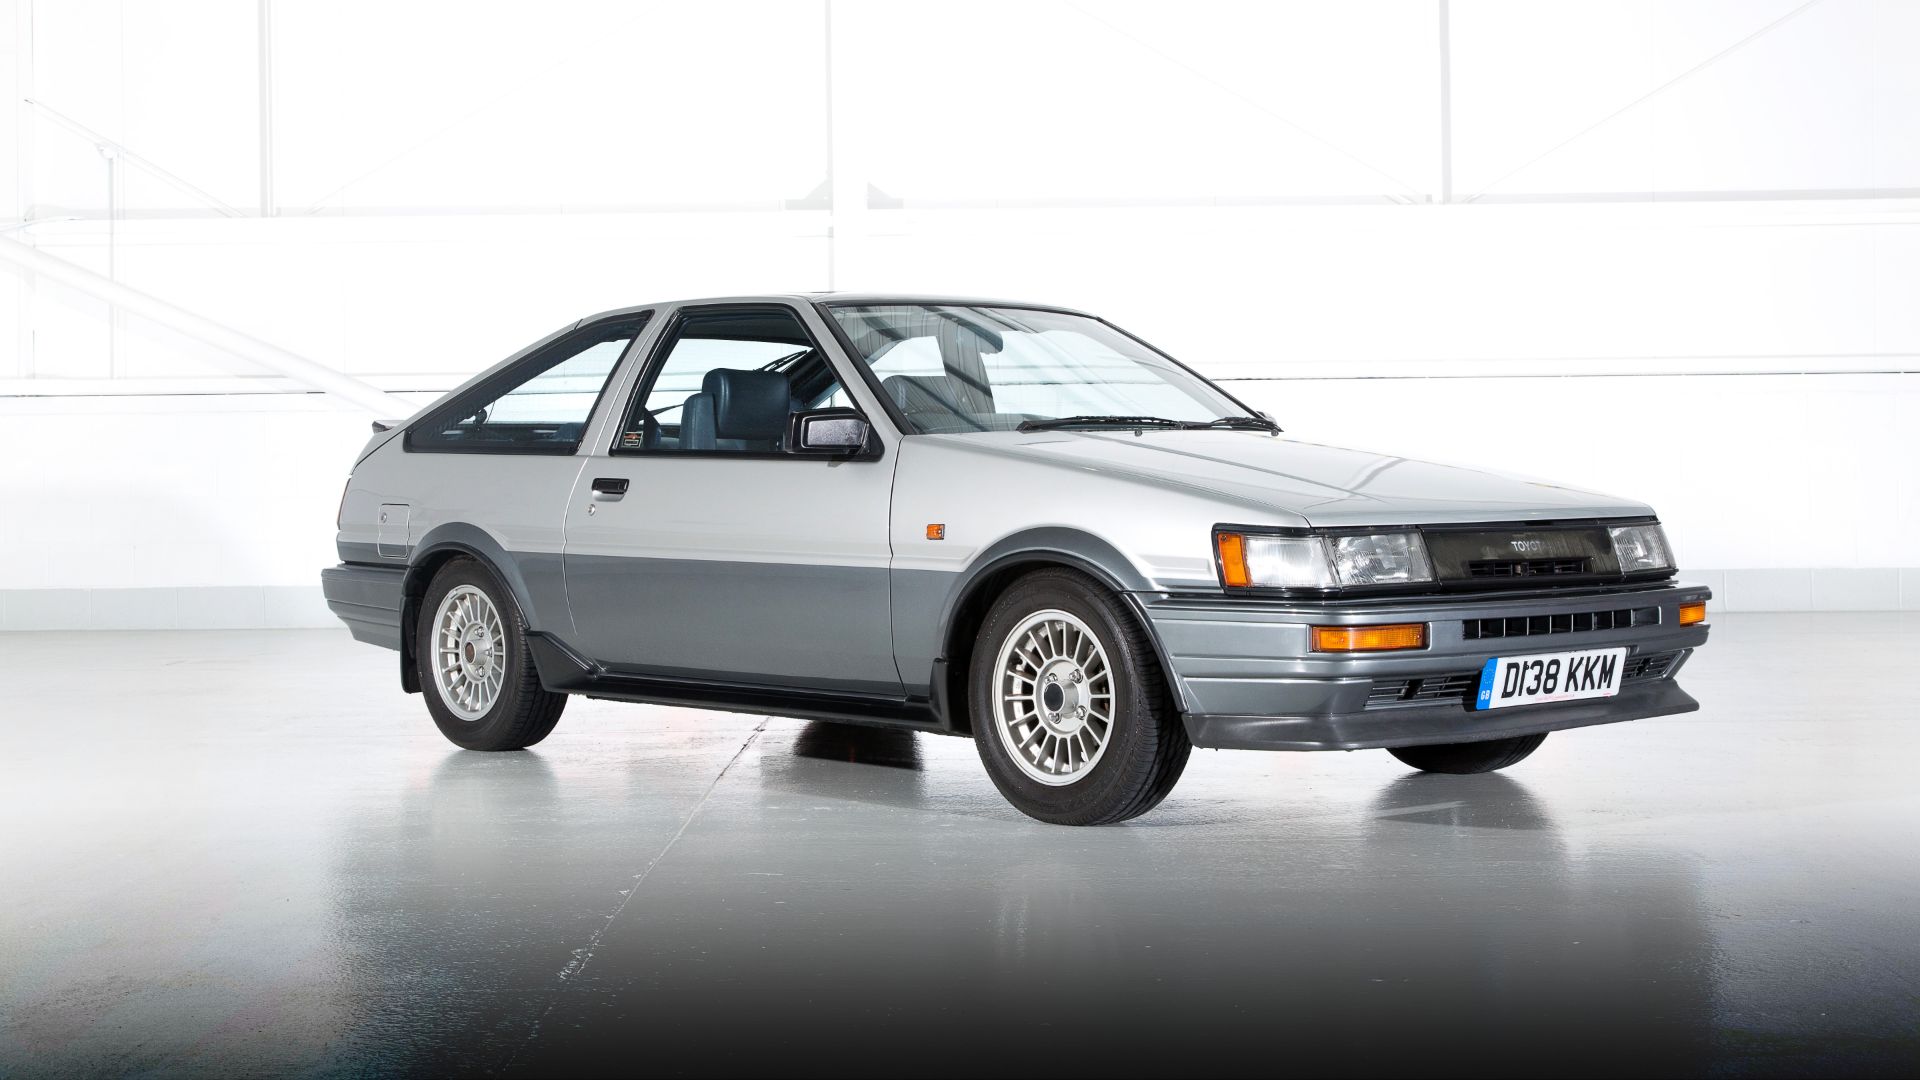 Toyota Corolla GT AE86 review: Retro Road Test